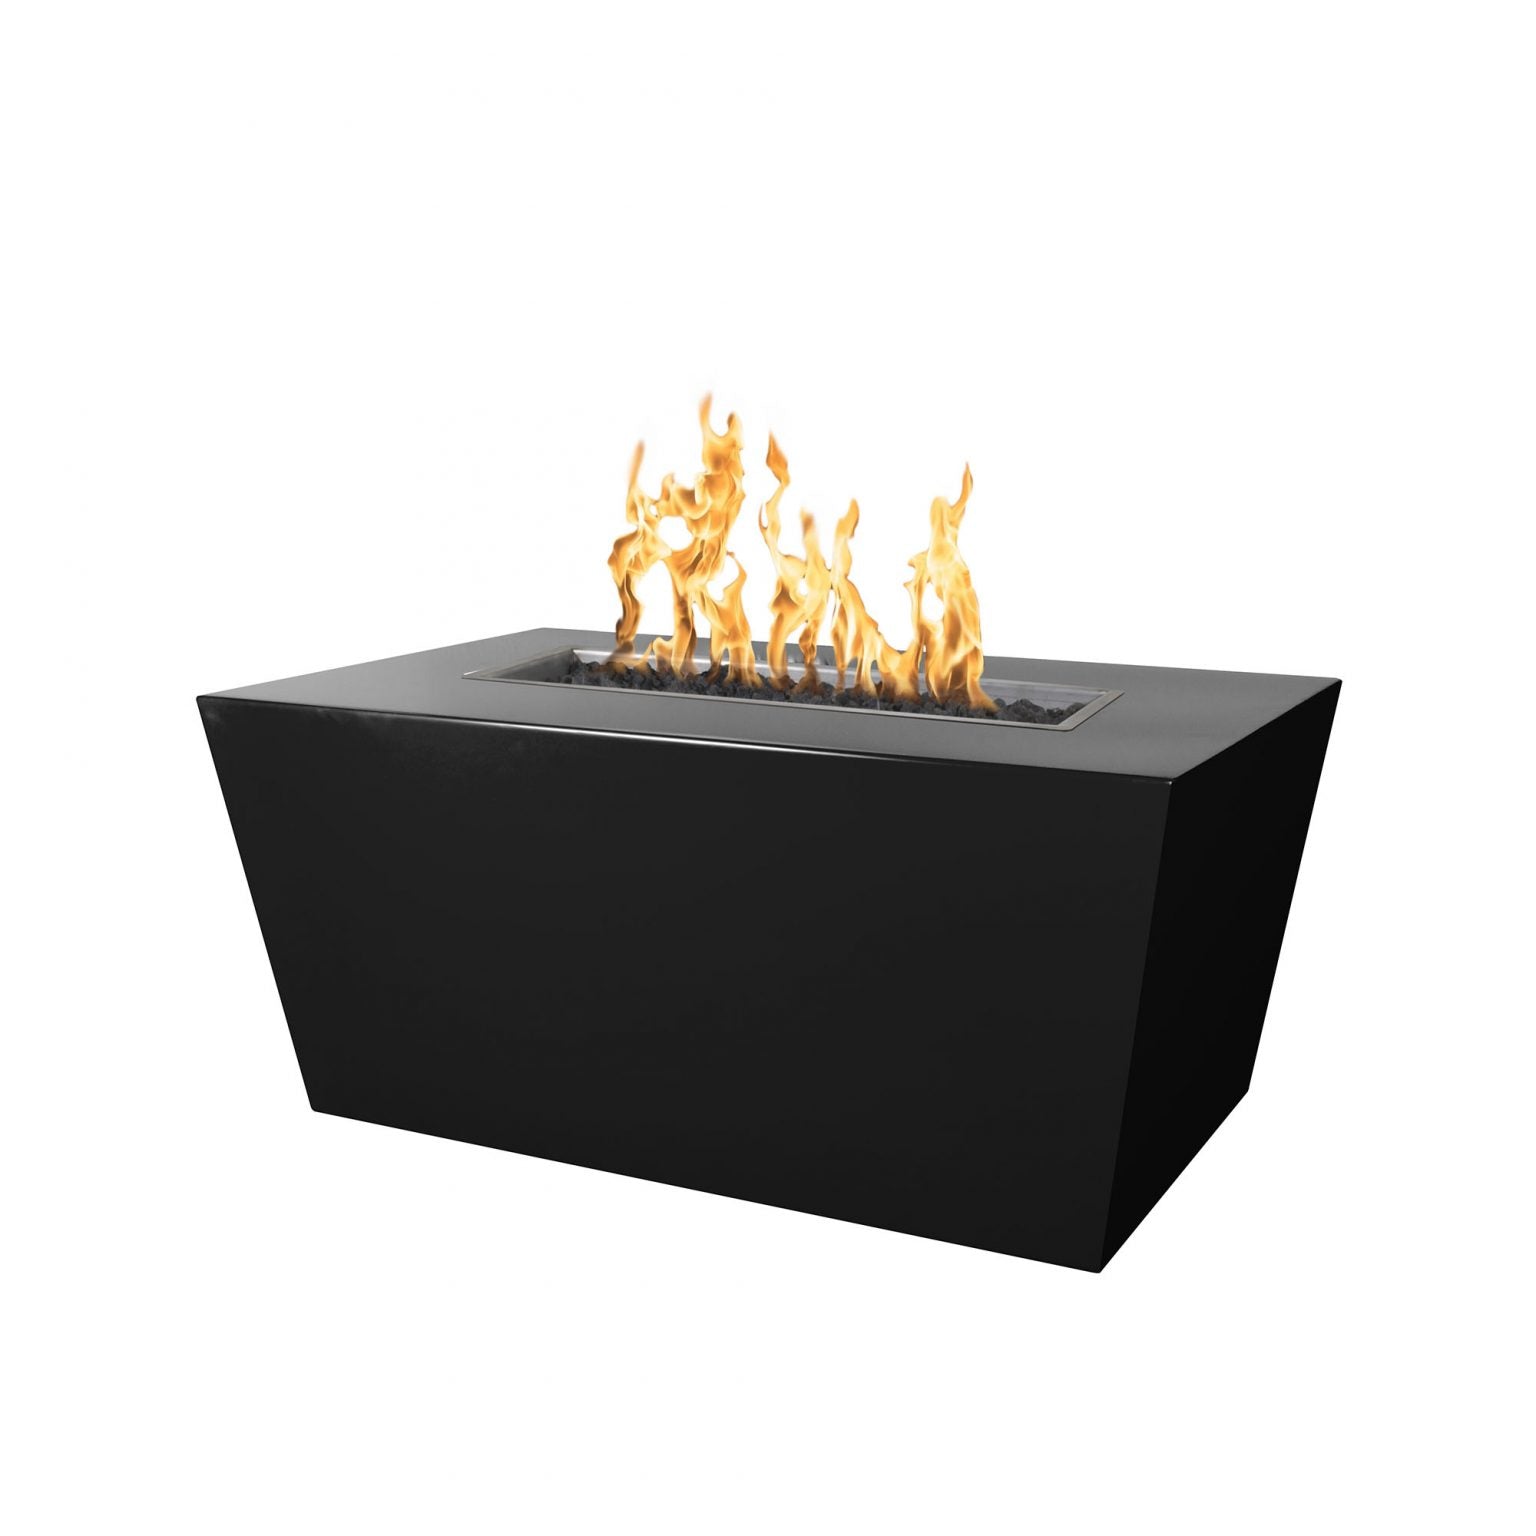 The Outdoor Plus Mesa Fire Pit Powder Coated Metal OPT-PCTTXX - Serenity Provision